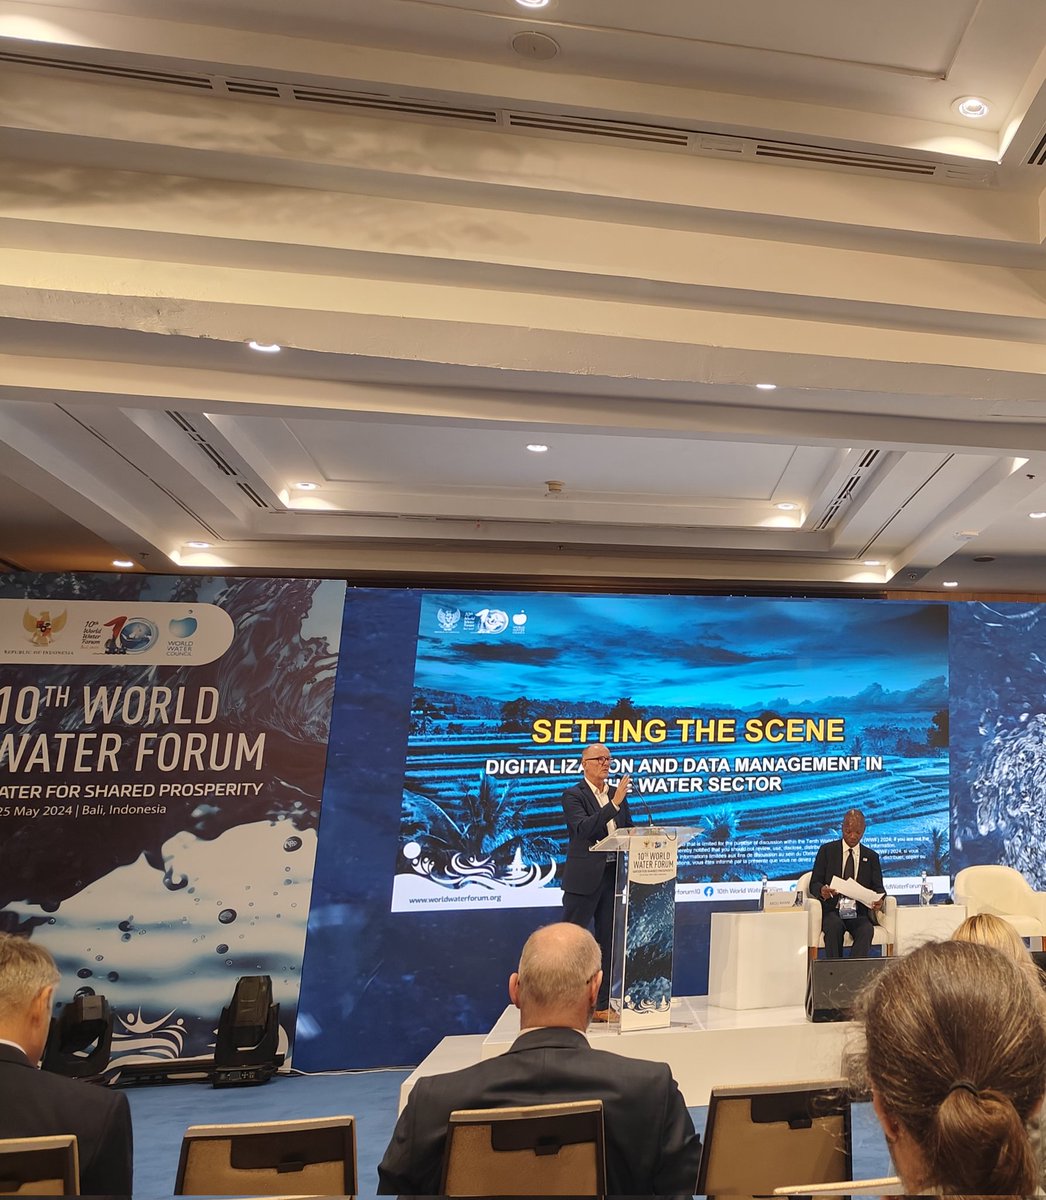 Digitalization, future technologies, such as AI, remote sensing and others need to be explored further for efficient water sector and for a resilient system. #WWF10 #digital #futuretec